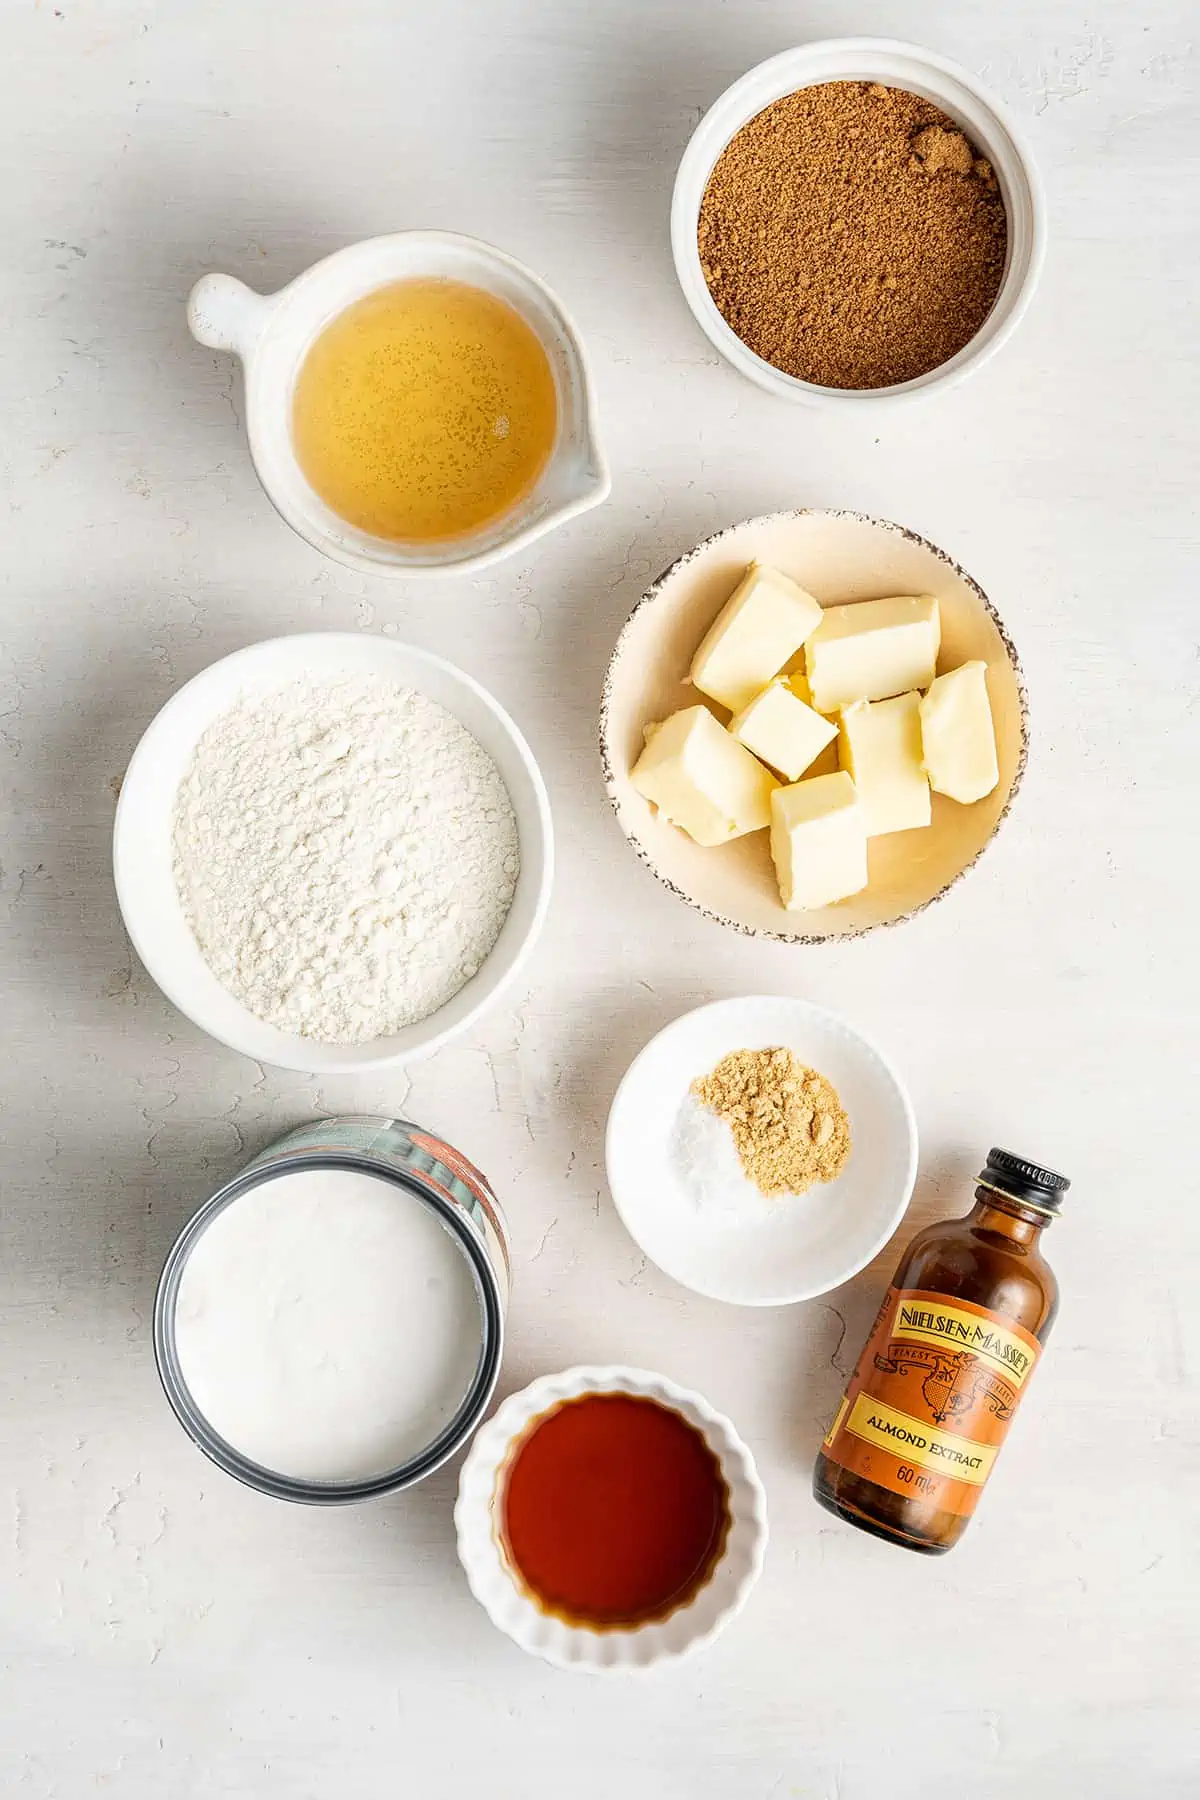 Overhead view of the ingredients for brandy snaps: a bowl of vegan butter, a bowl of sugar, a bowl of agave, a bowl of flour, a bowl of coconut cream, a bowl of seasonings, a bowl of maple syrup, and a bottle of vanilla extract